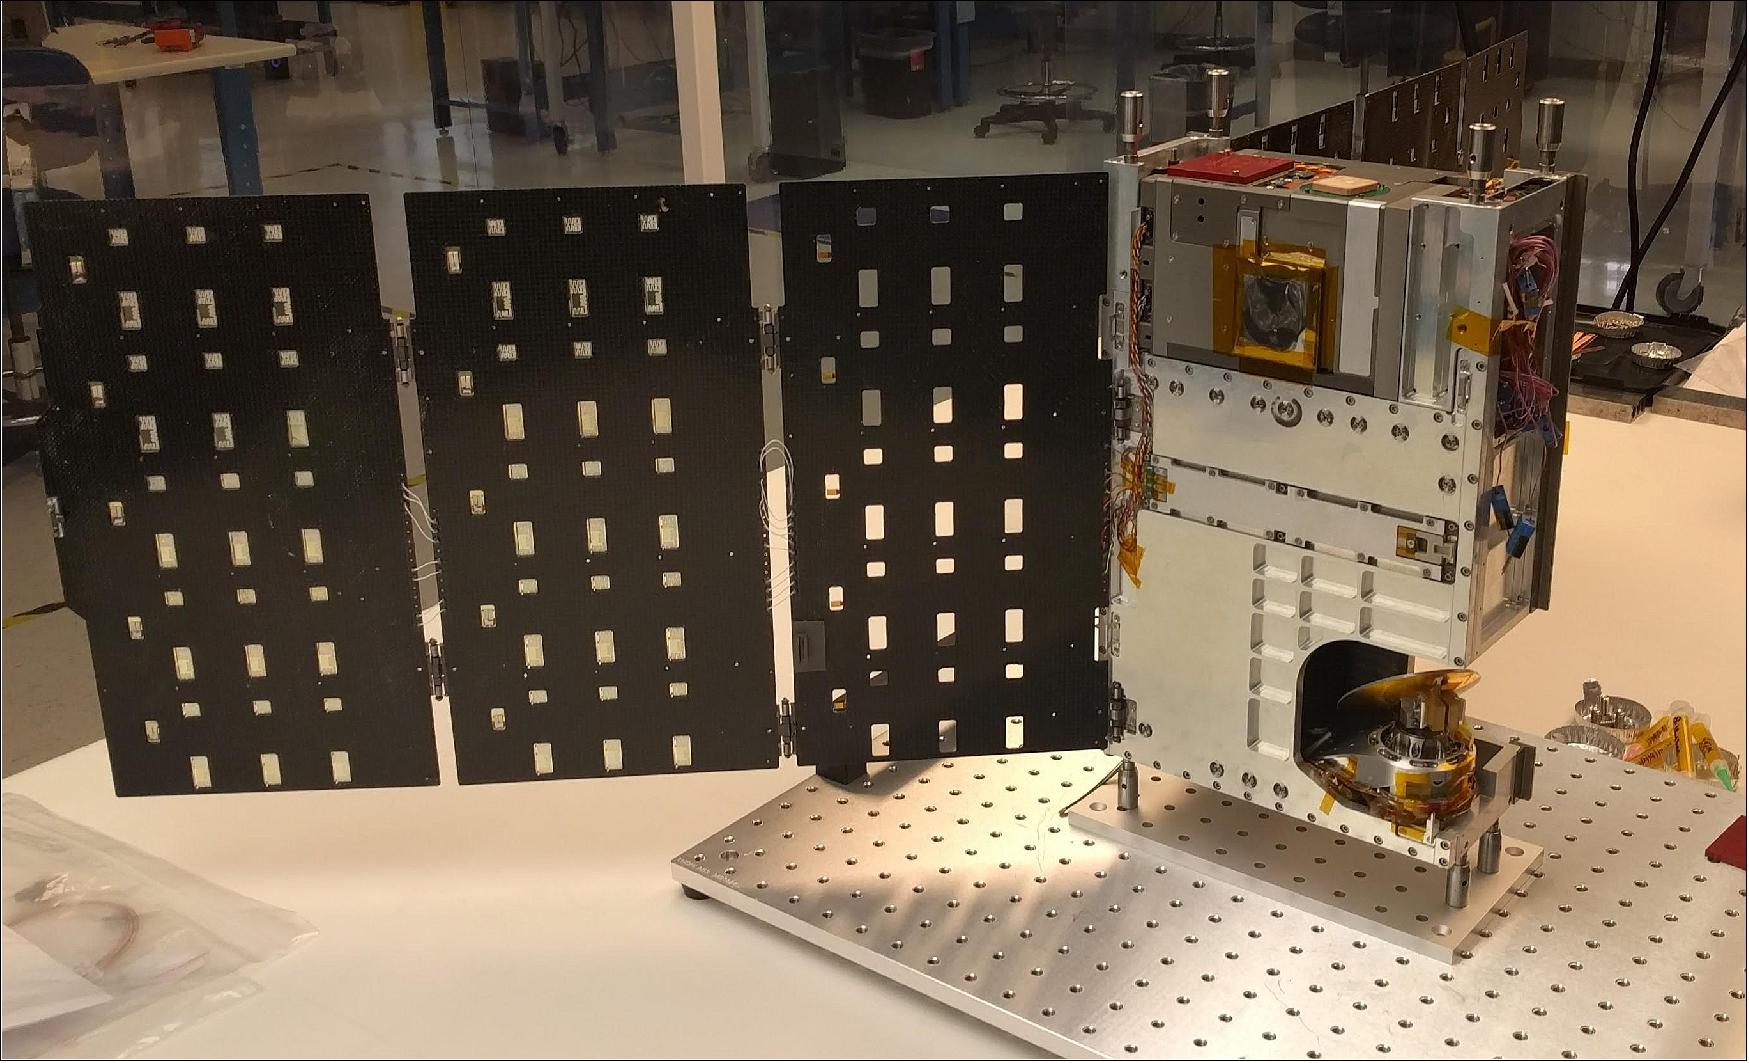 Figure 3: The TEMPEST-D satellite at Blue Canyon Technologies in Boulder, CO (image credit: Blue Canyon Technologies) 7)